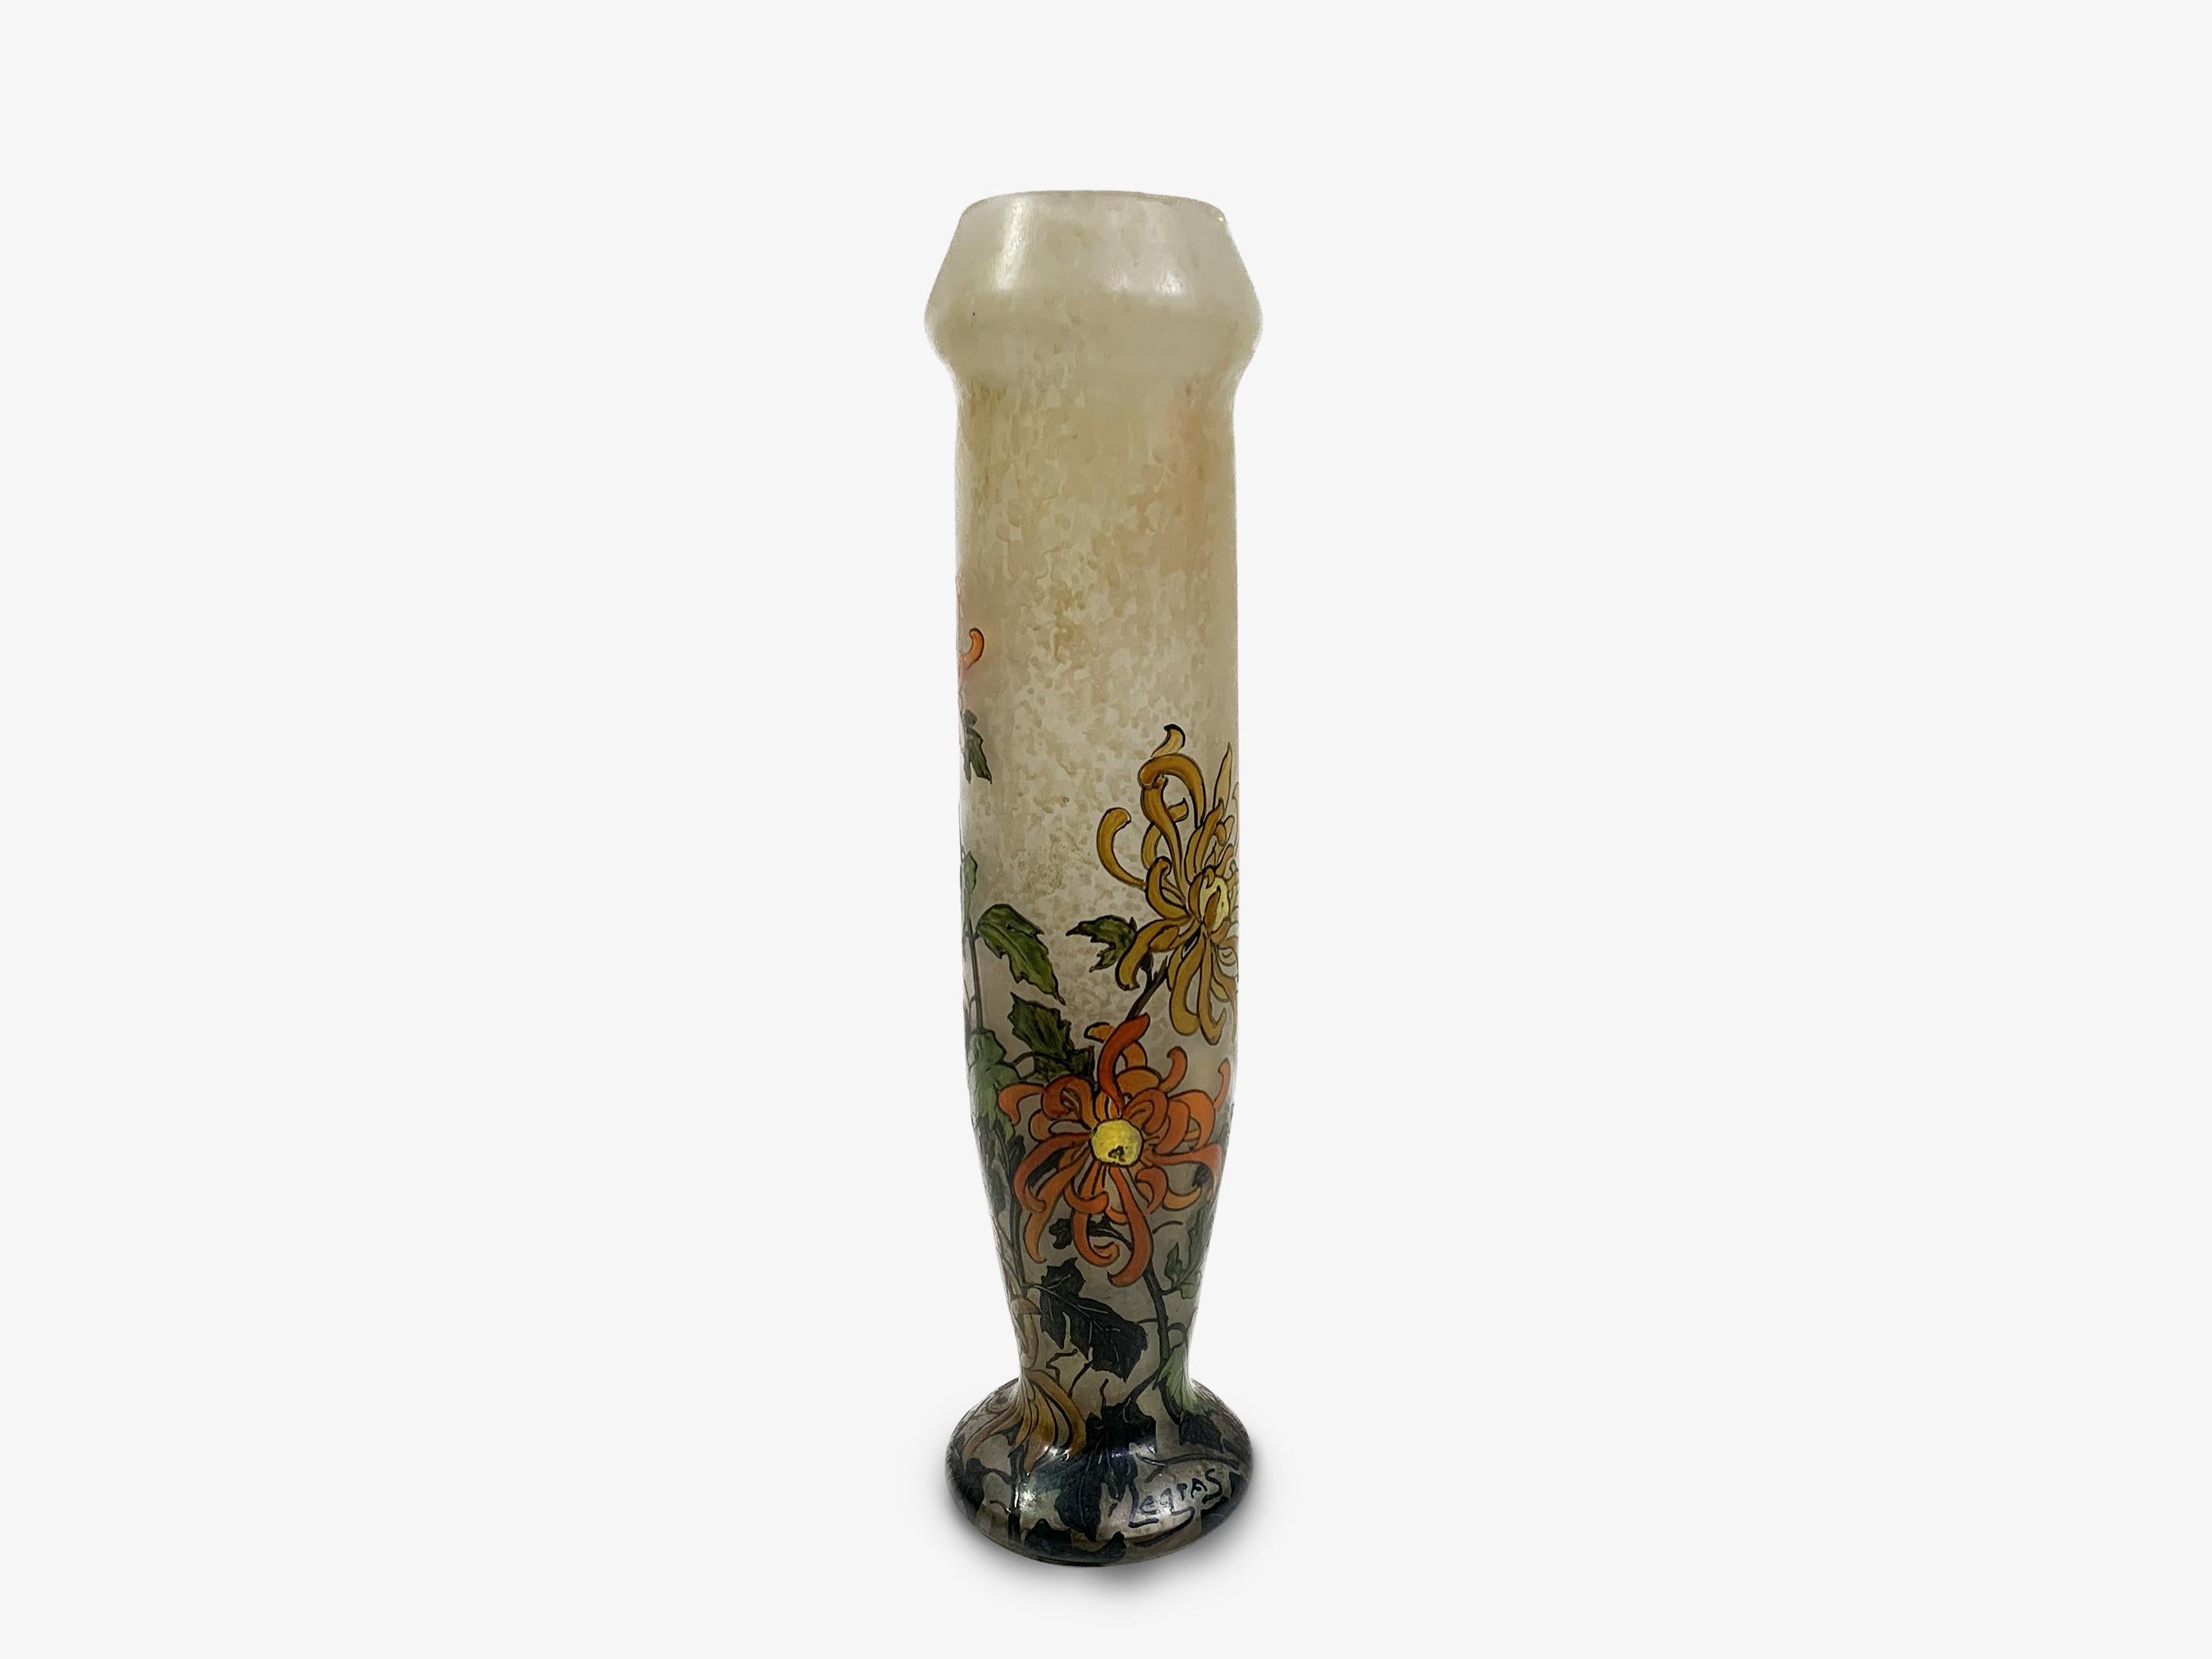 An art nouveau enameled flower vase signed by Francois Theodore Legras, one of the master glass-makers from Art Nouveau period.
The vase, is hand-painted depicting aster flowers encircling its surface, showcases both the artistry of